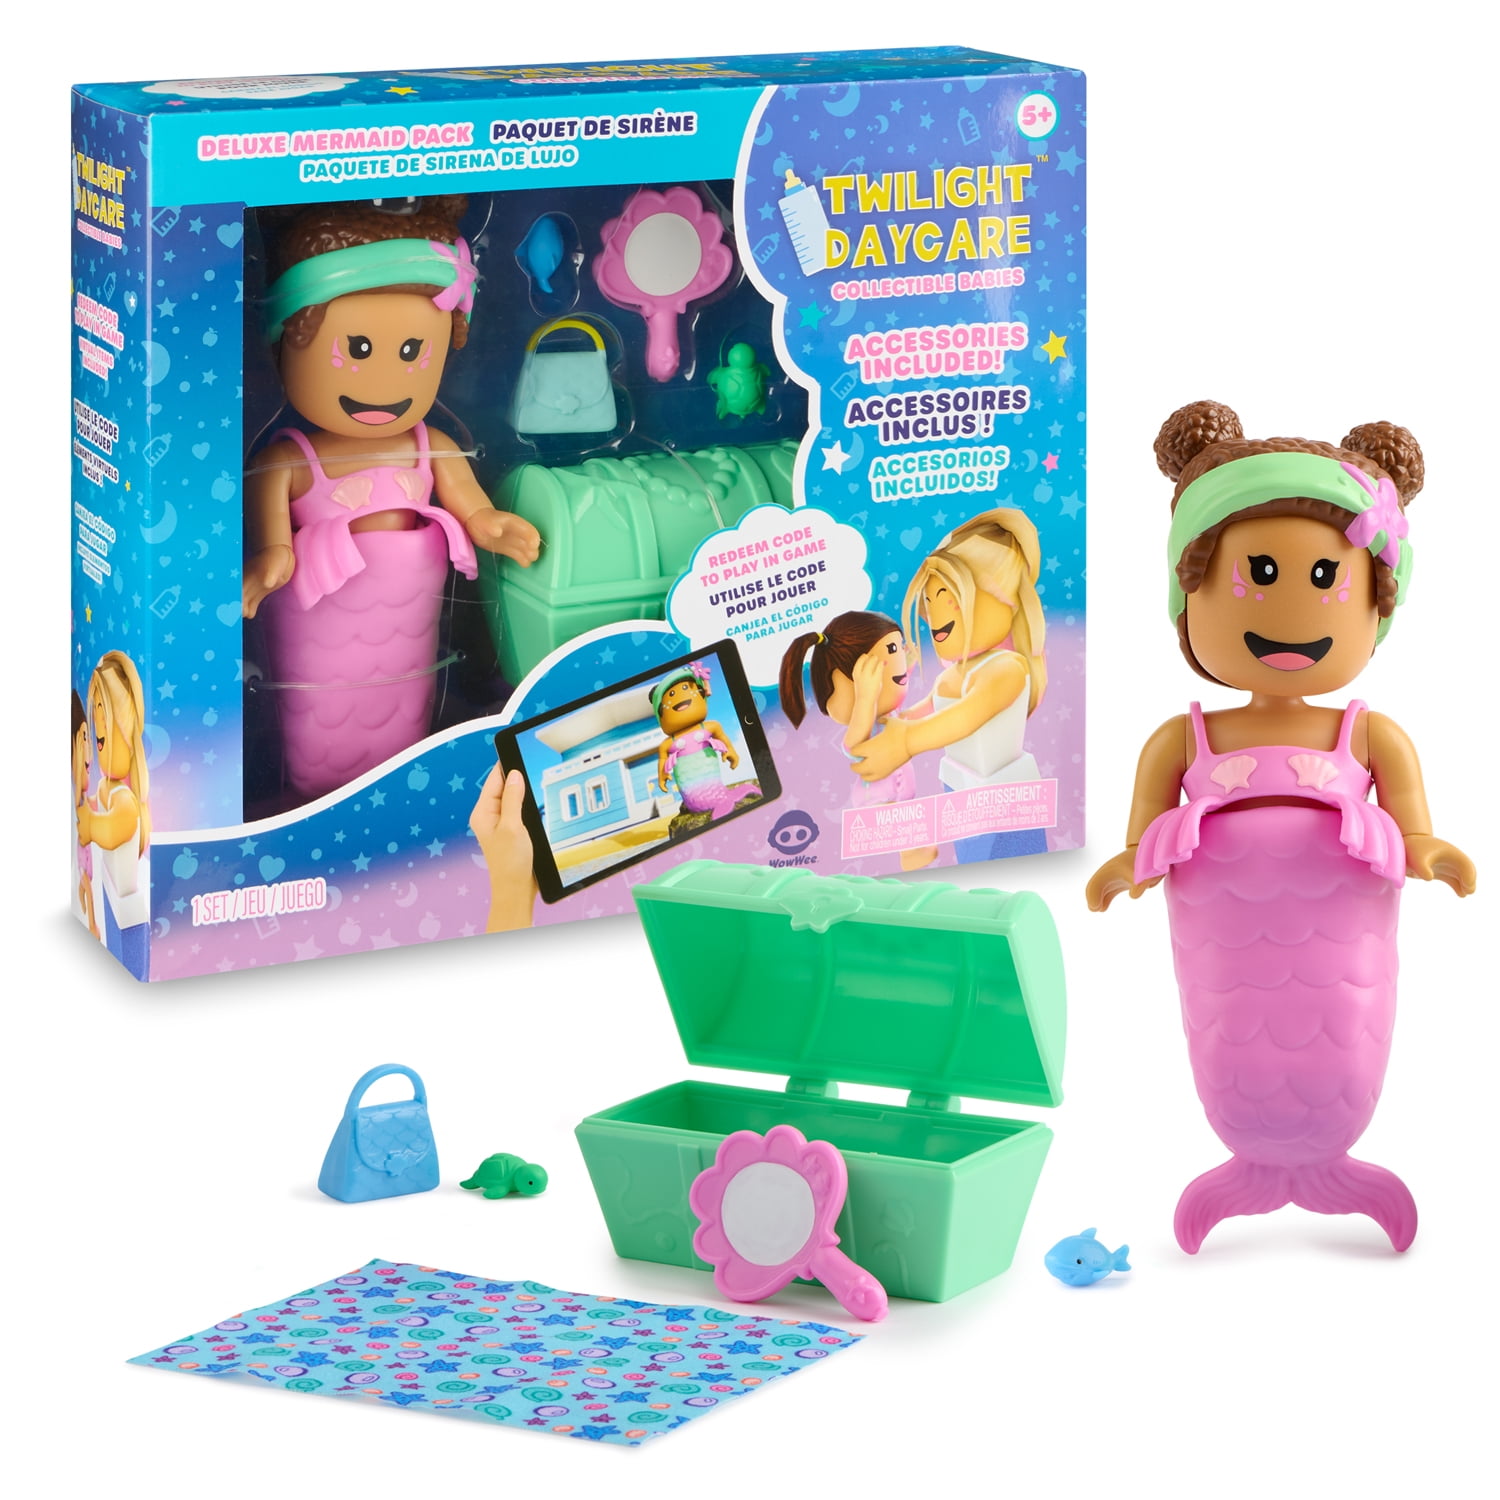 Twilight Daycare Collectible Babies - Deluxe Mermaid Baby Pack